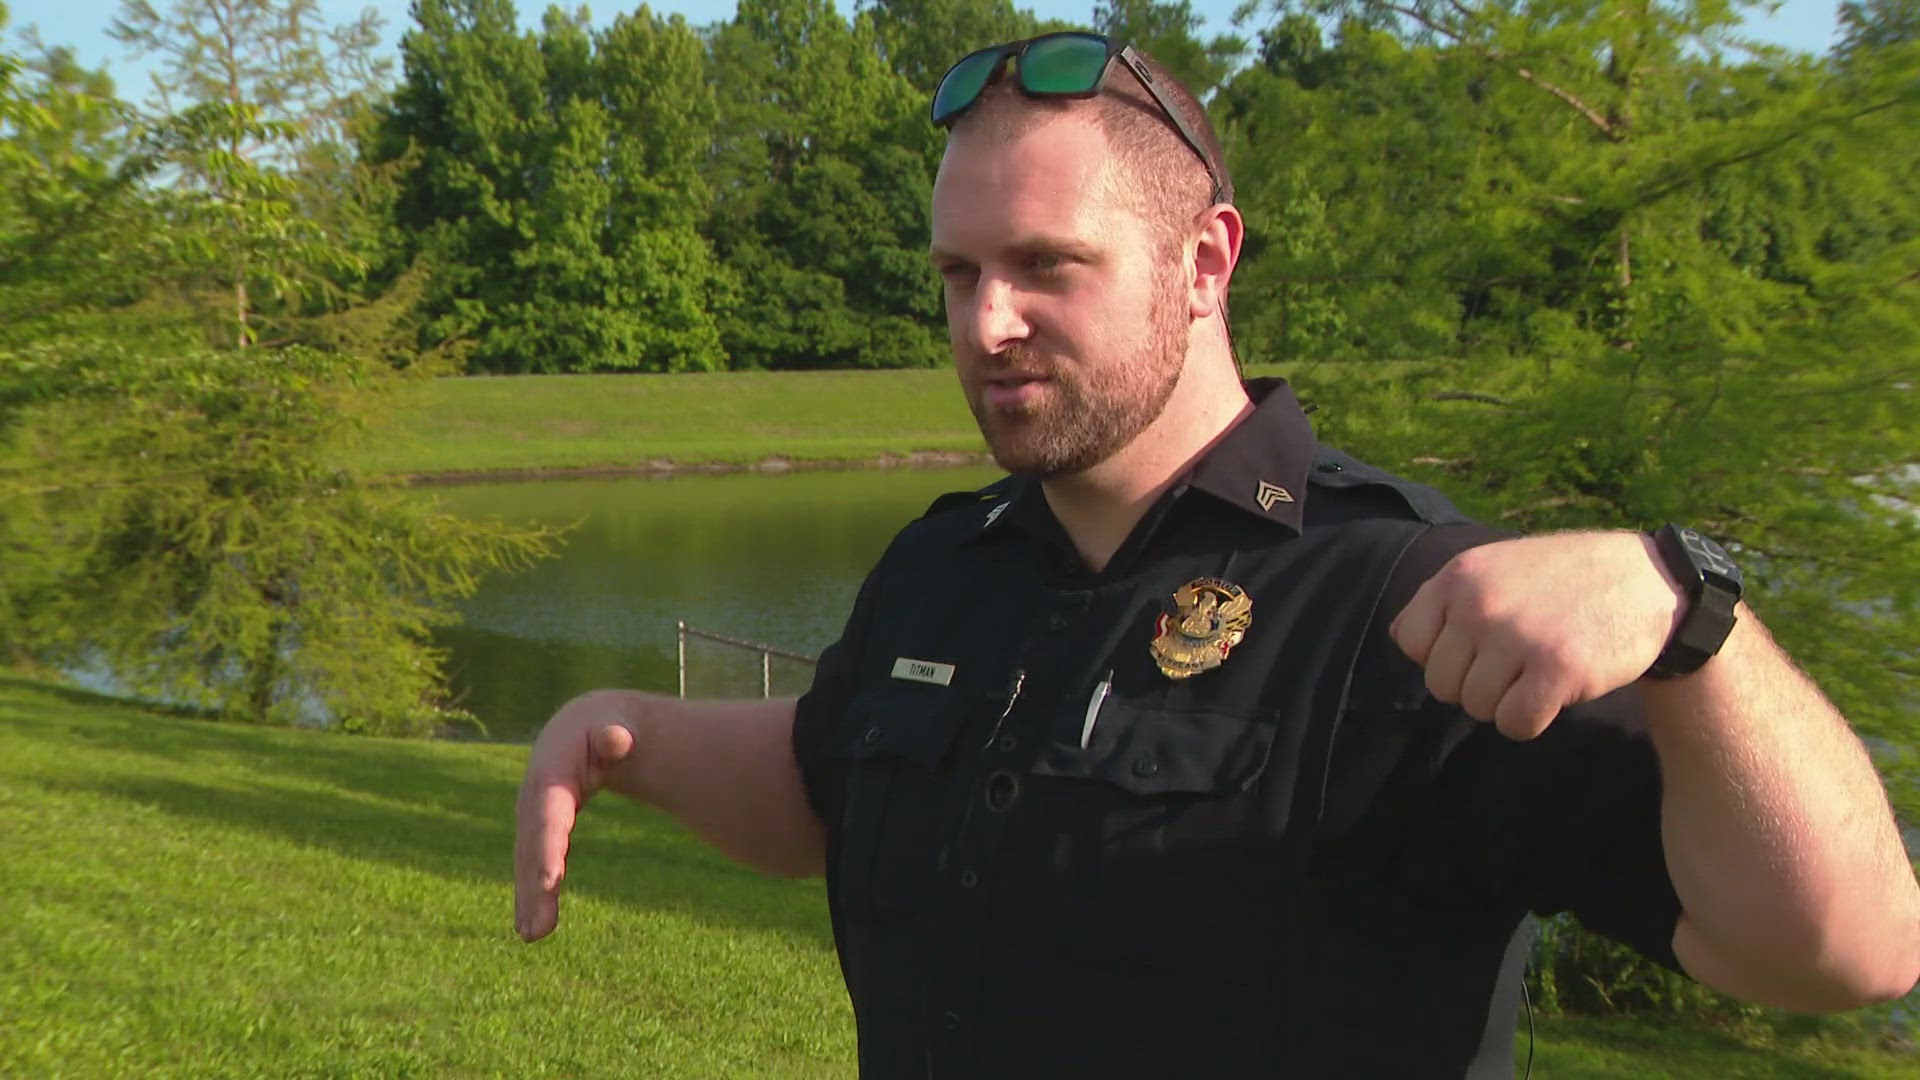 Last Thursday, Bowie police received a call about a dog in the deep end at a pond at Centennial Park.